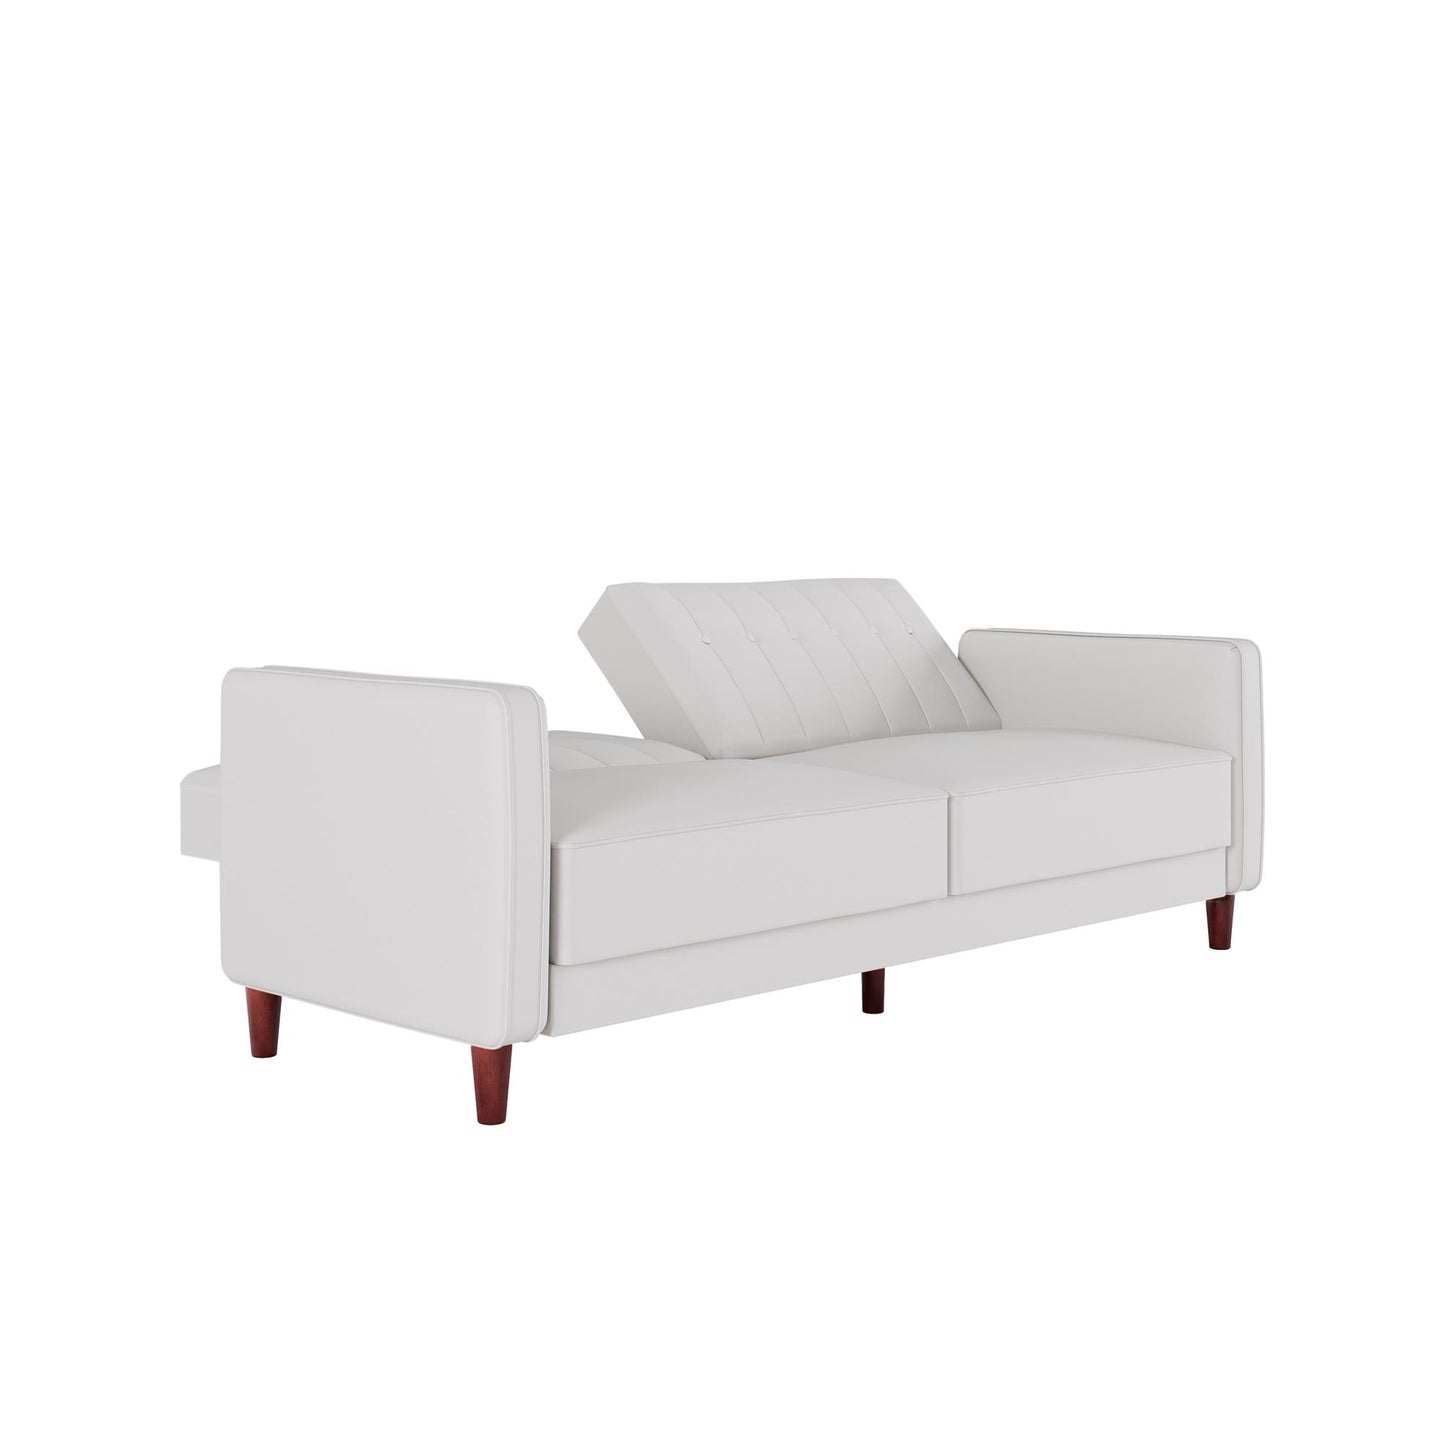 Pin Tufted Transitional Futon with Vertical Stitching and Button Tufting - White